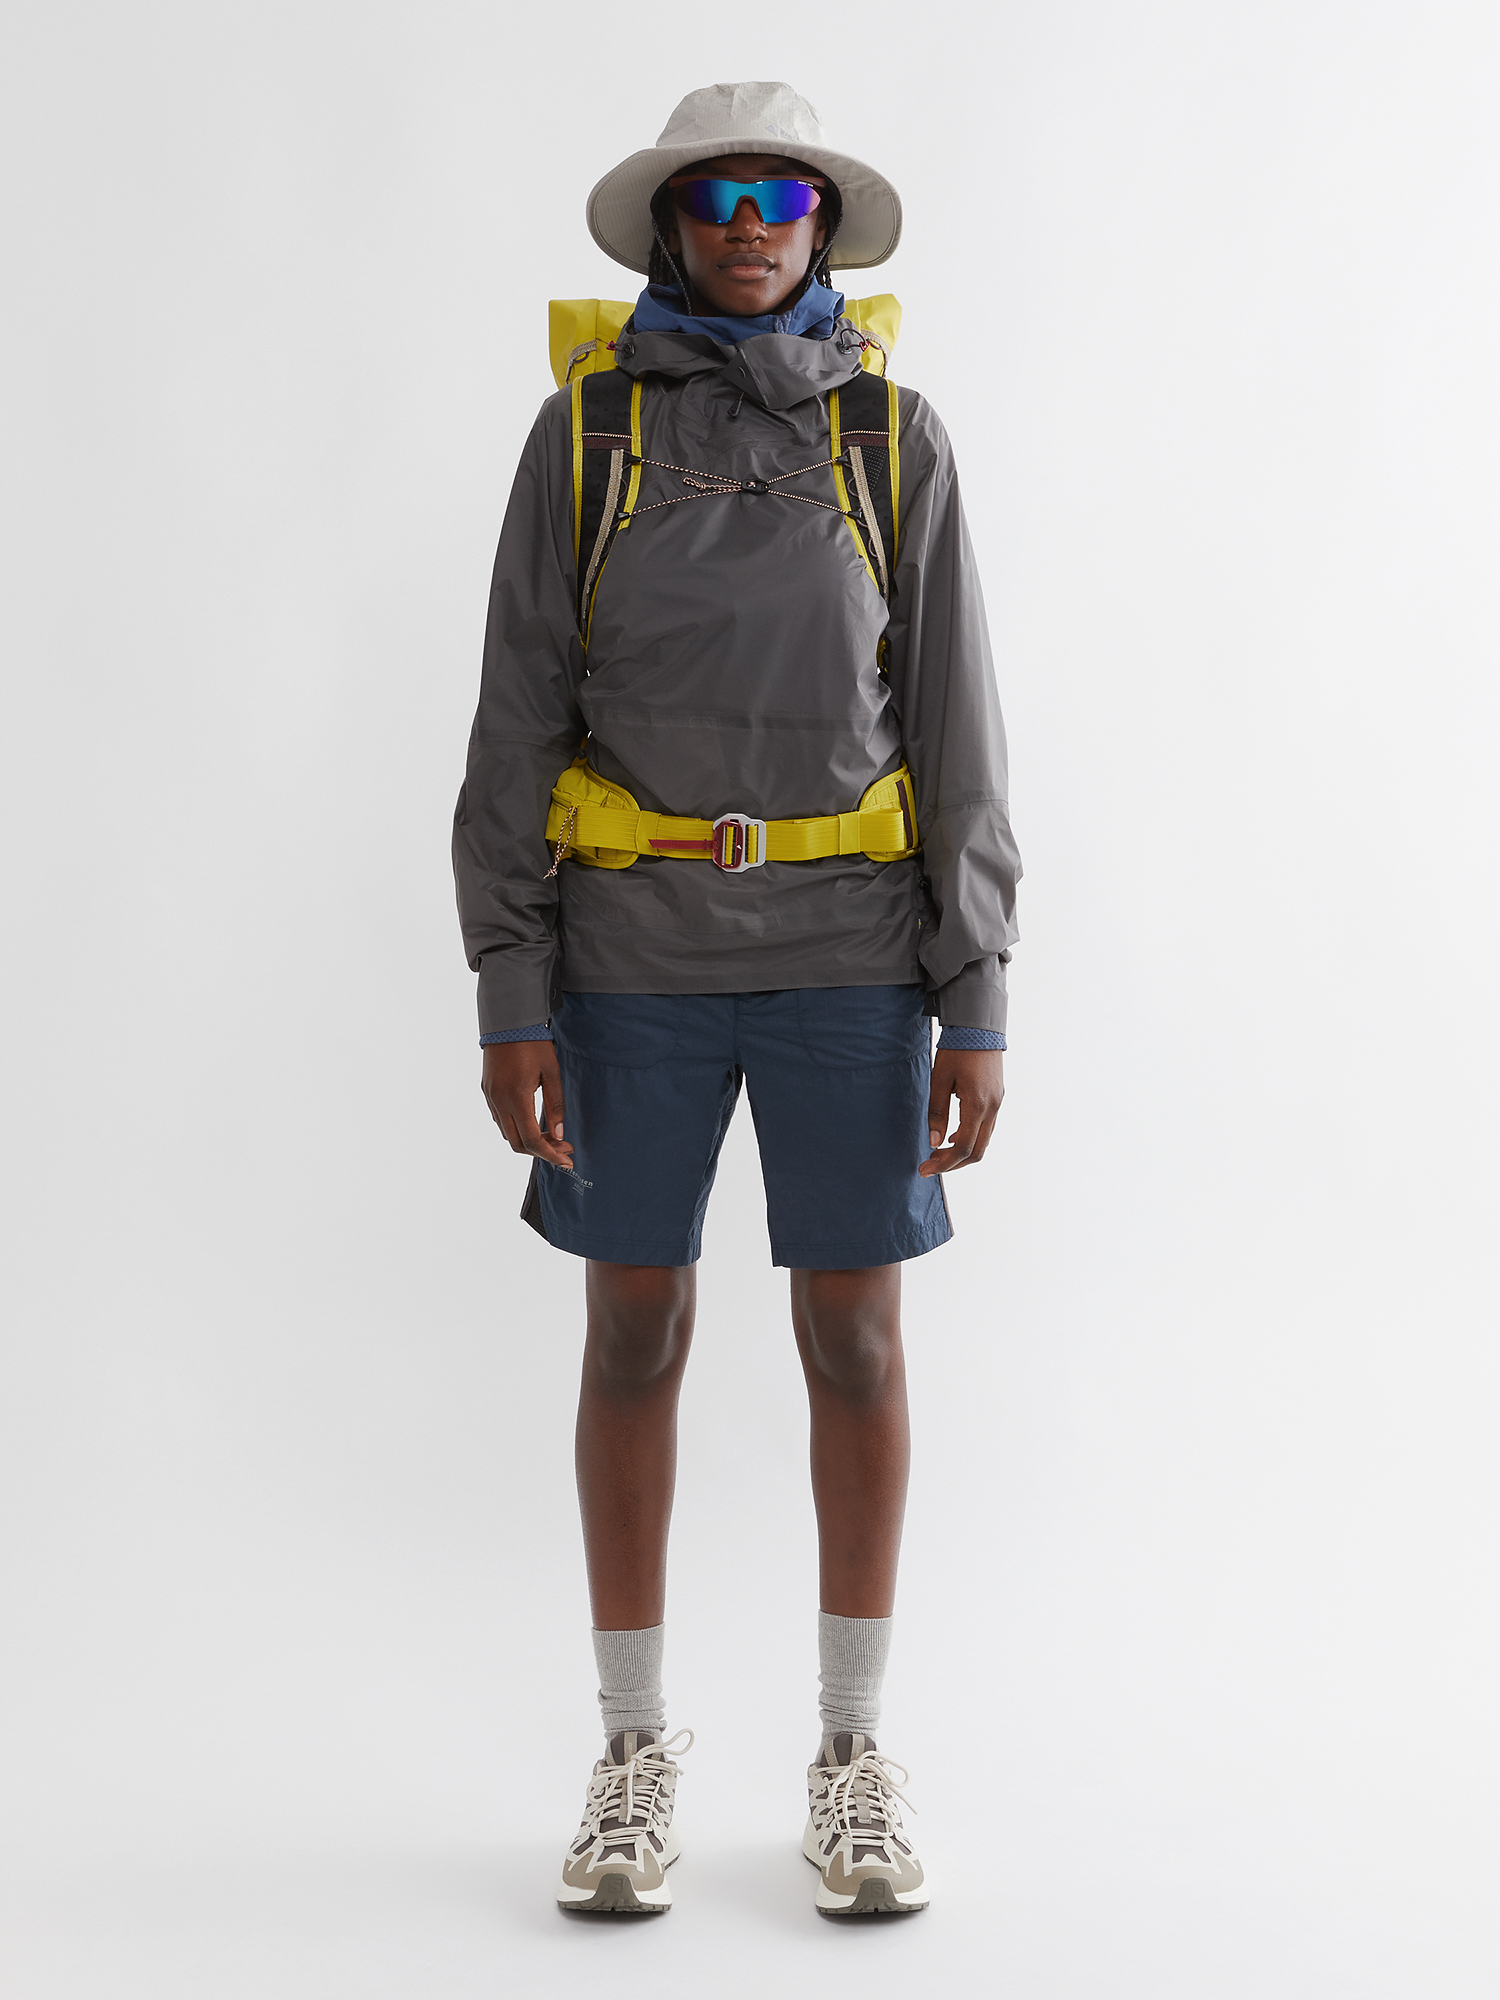 10122 - 197 Retina Mountain Backpack - Pine Sprout